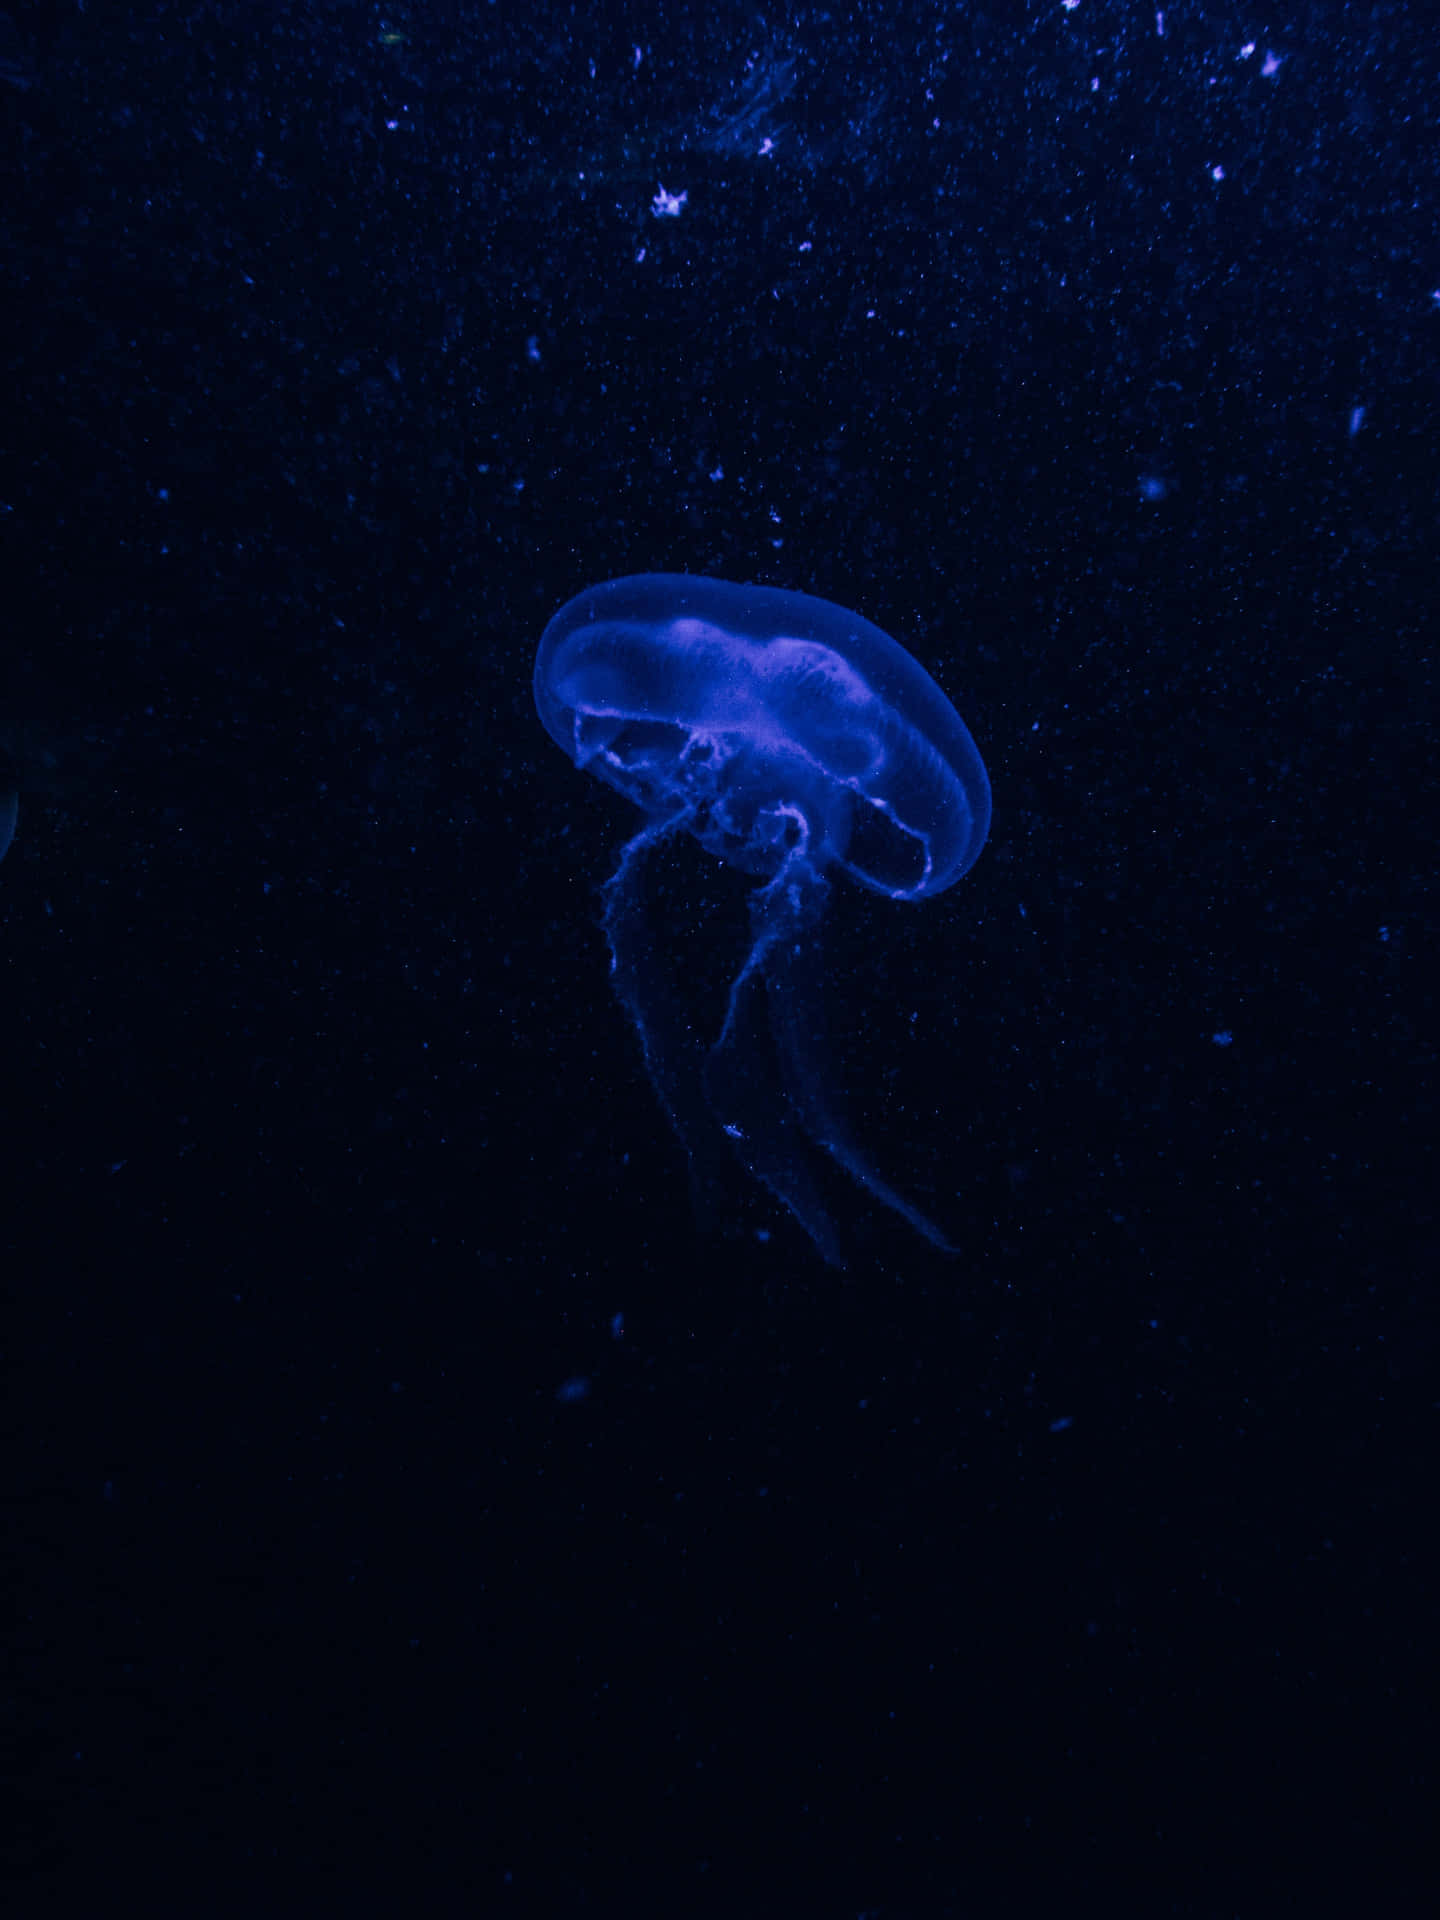 Scary Ocean Purple Jellyfish Picture 2736 x 3648 Picture